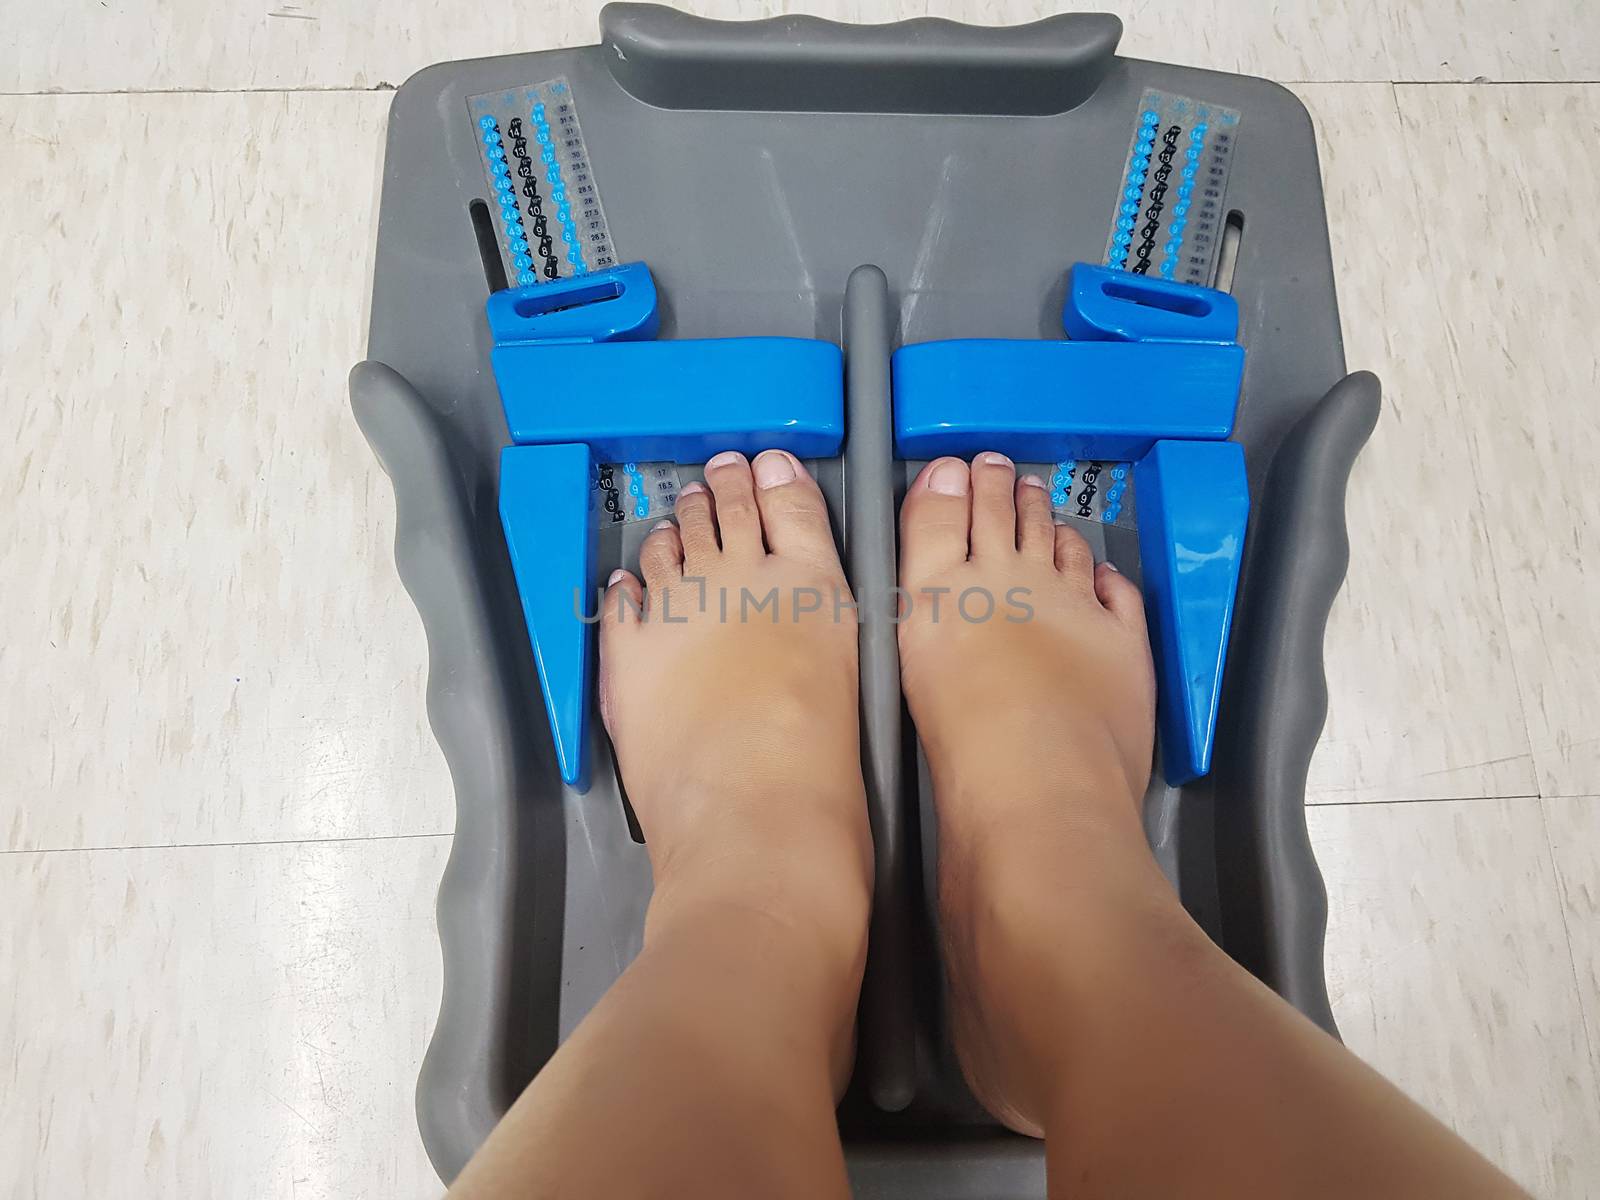 Foot measure tool - feet of customer in measure shoe size in retail footwear stores to measure accurately foot sizes on the floor. Made of plastic with simple functional.